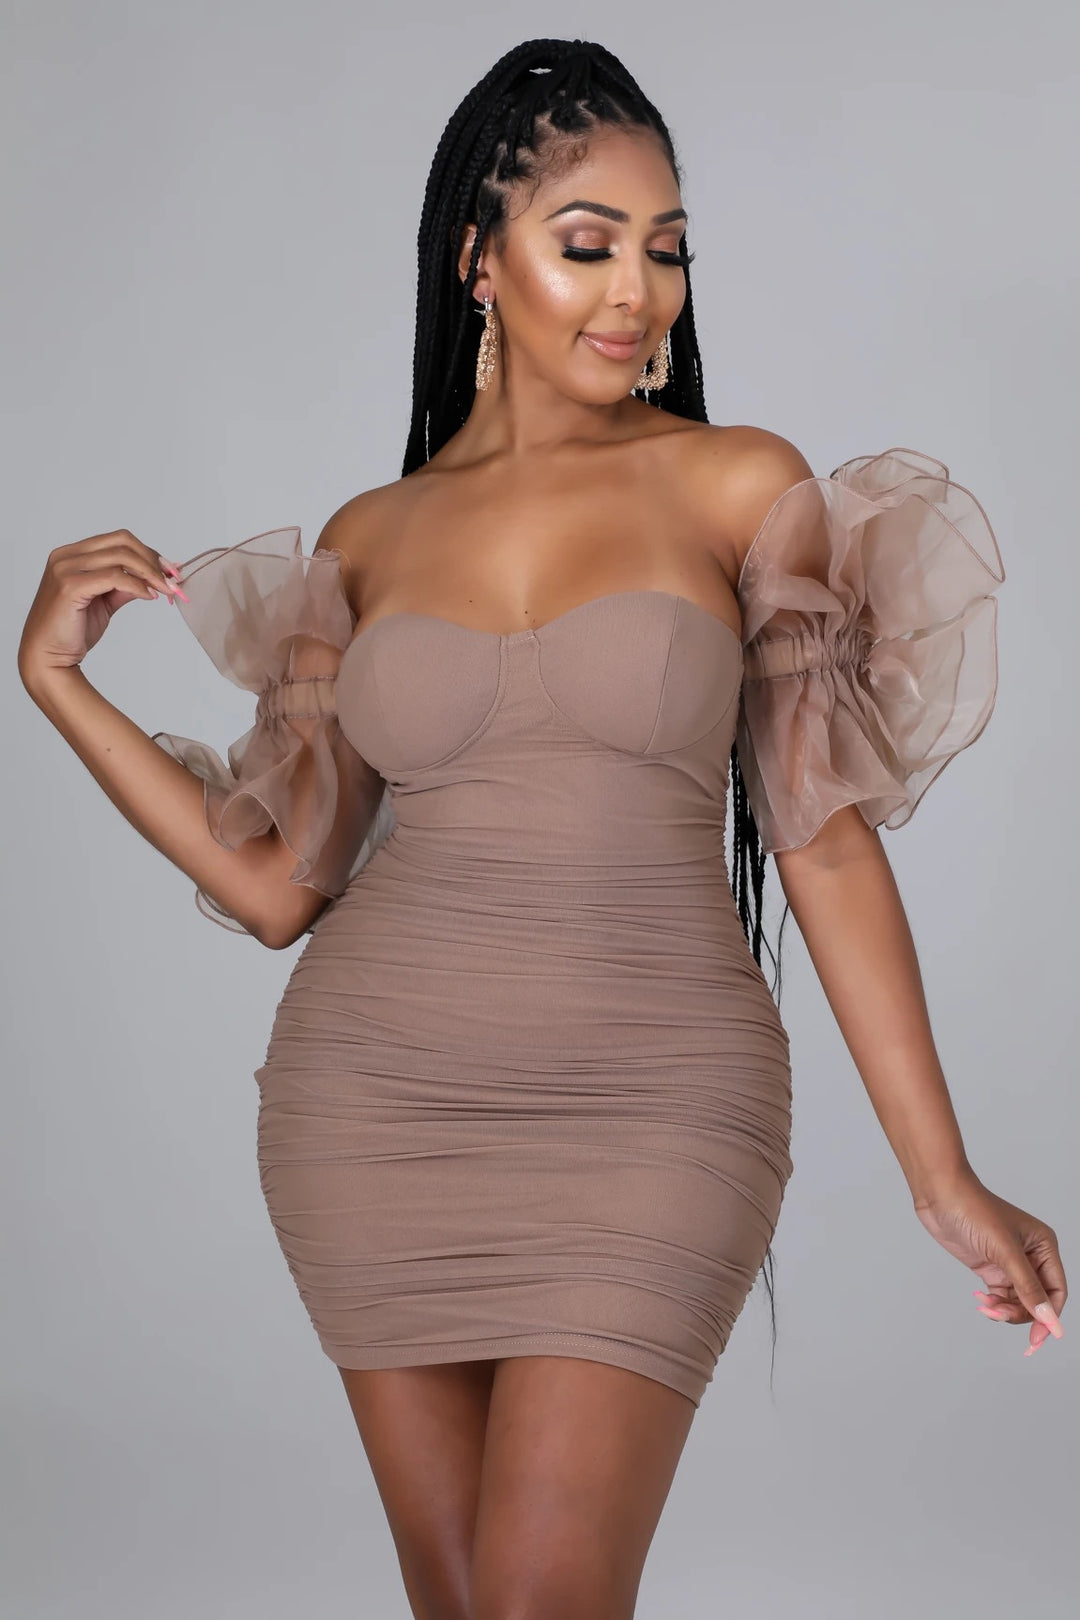 The Show Stopper Dress || Latte - Rehabcouture